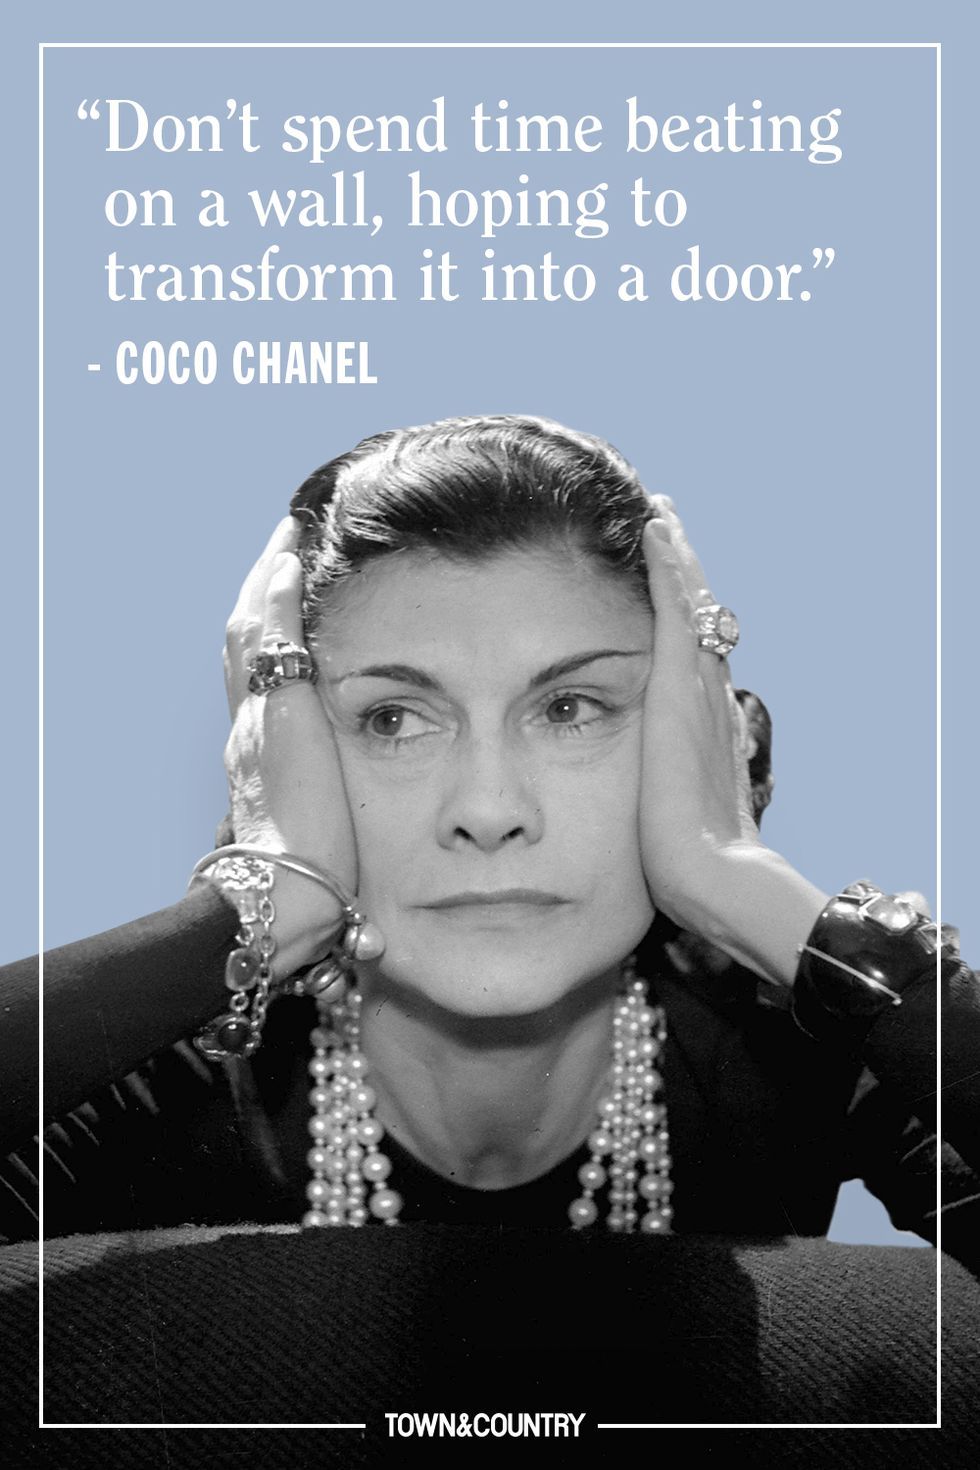 Coco Chanel Quotes about Fashion Success and Love